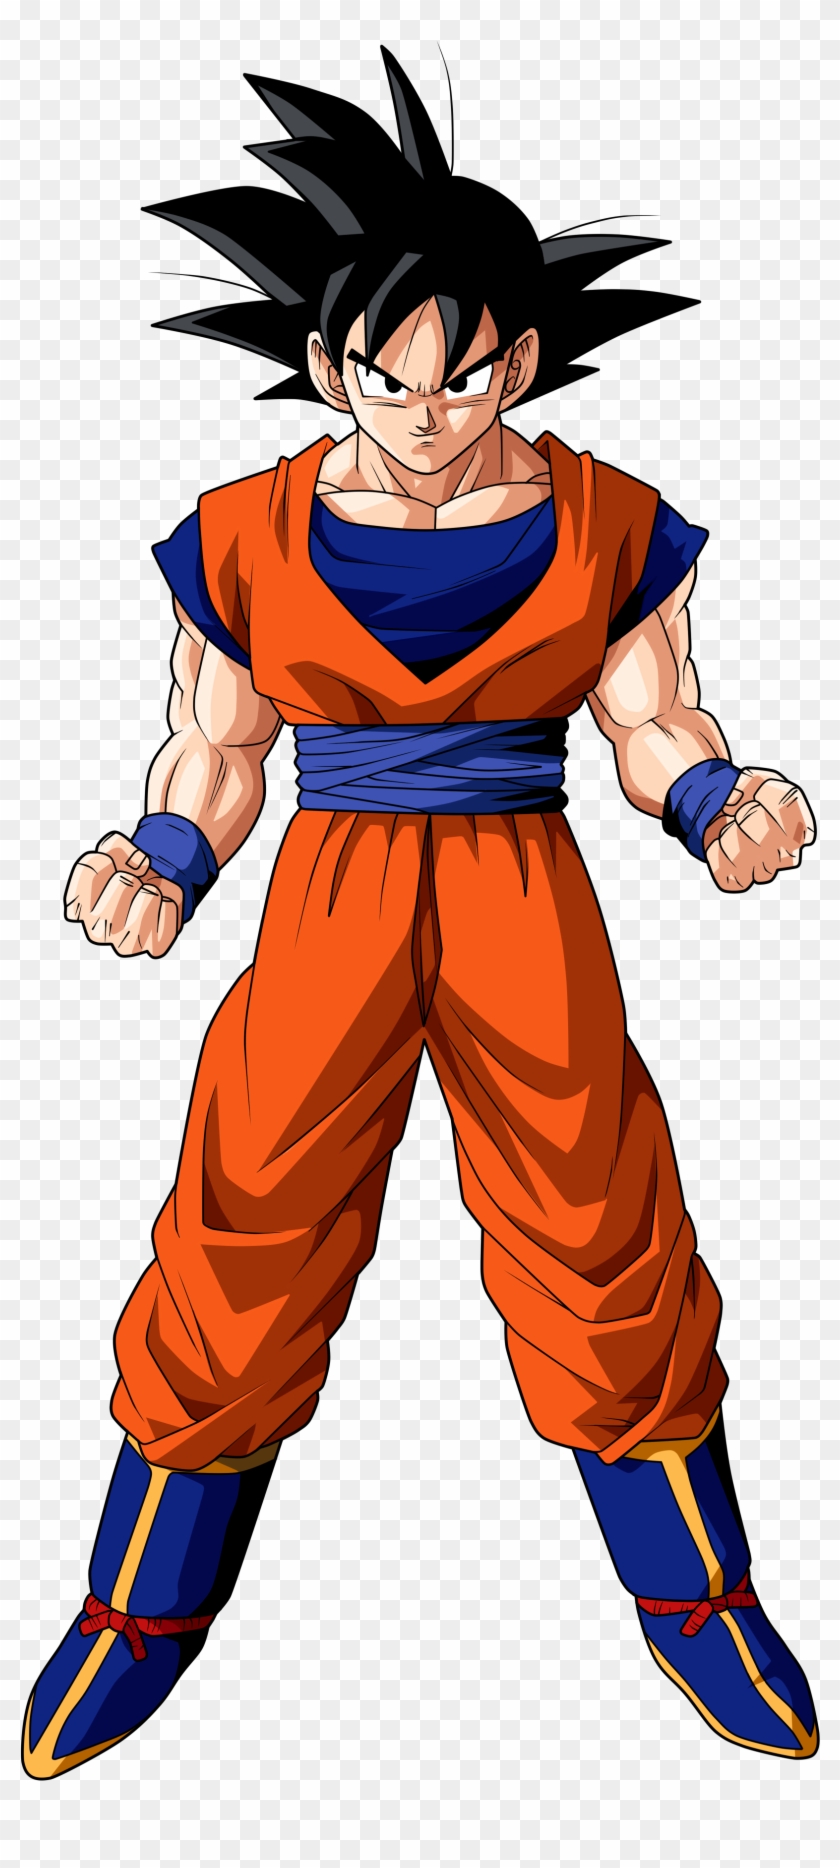 Image - Dragon Ball Z Heroes - Free Transparent PNG Clipart Images Download